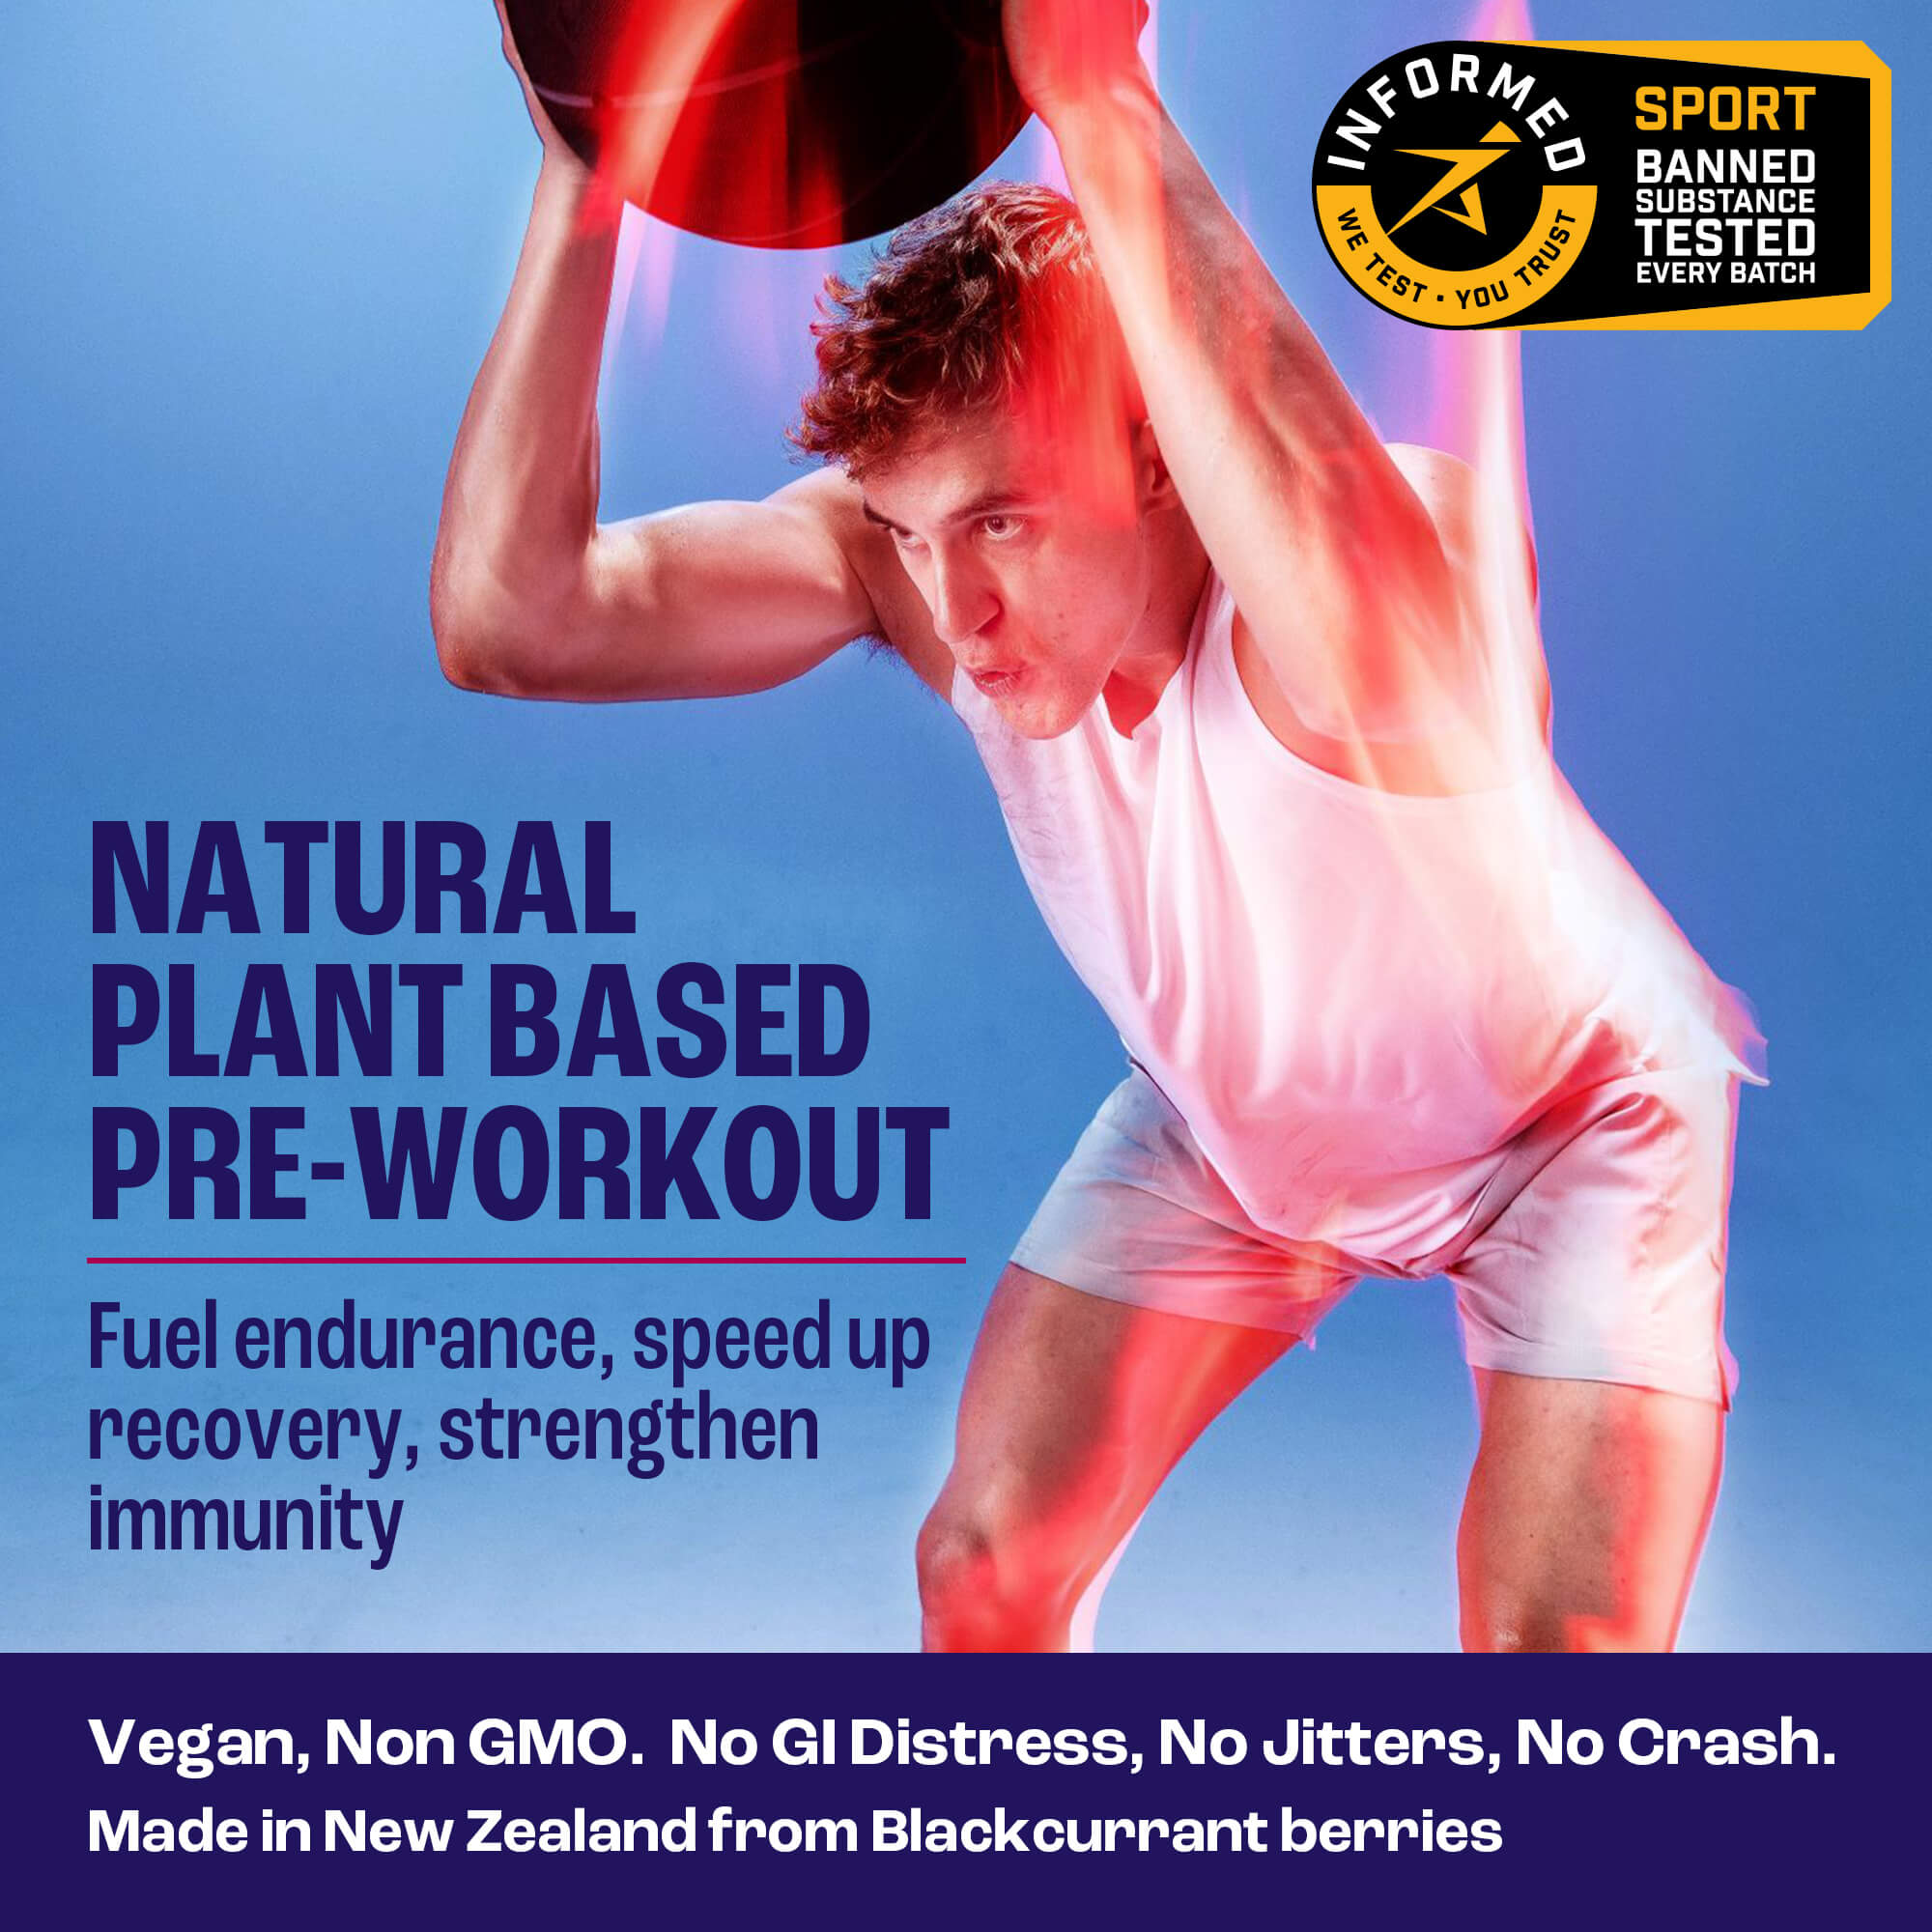 2before is a natural, plant-based pre-workout made from blackcurrants